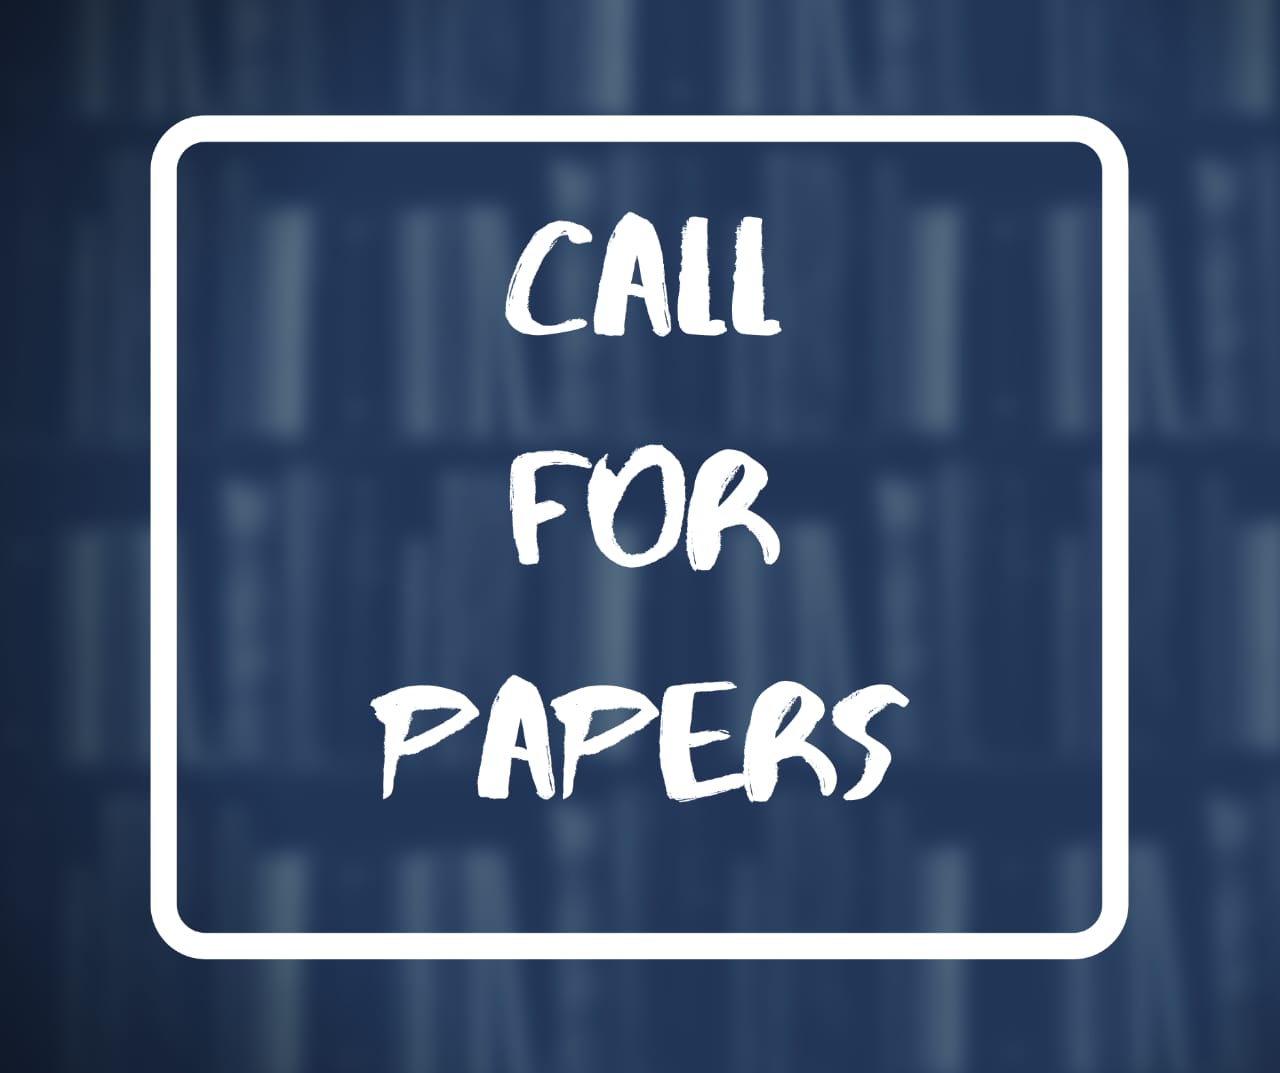 Call for Papers: FIMT Law Journal, Special Issue on Artificial Intelligence & Law (Submit by 27 Oct)